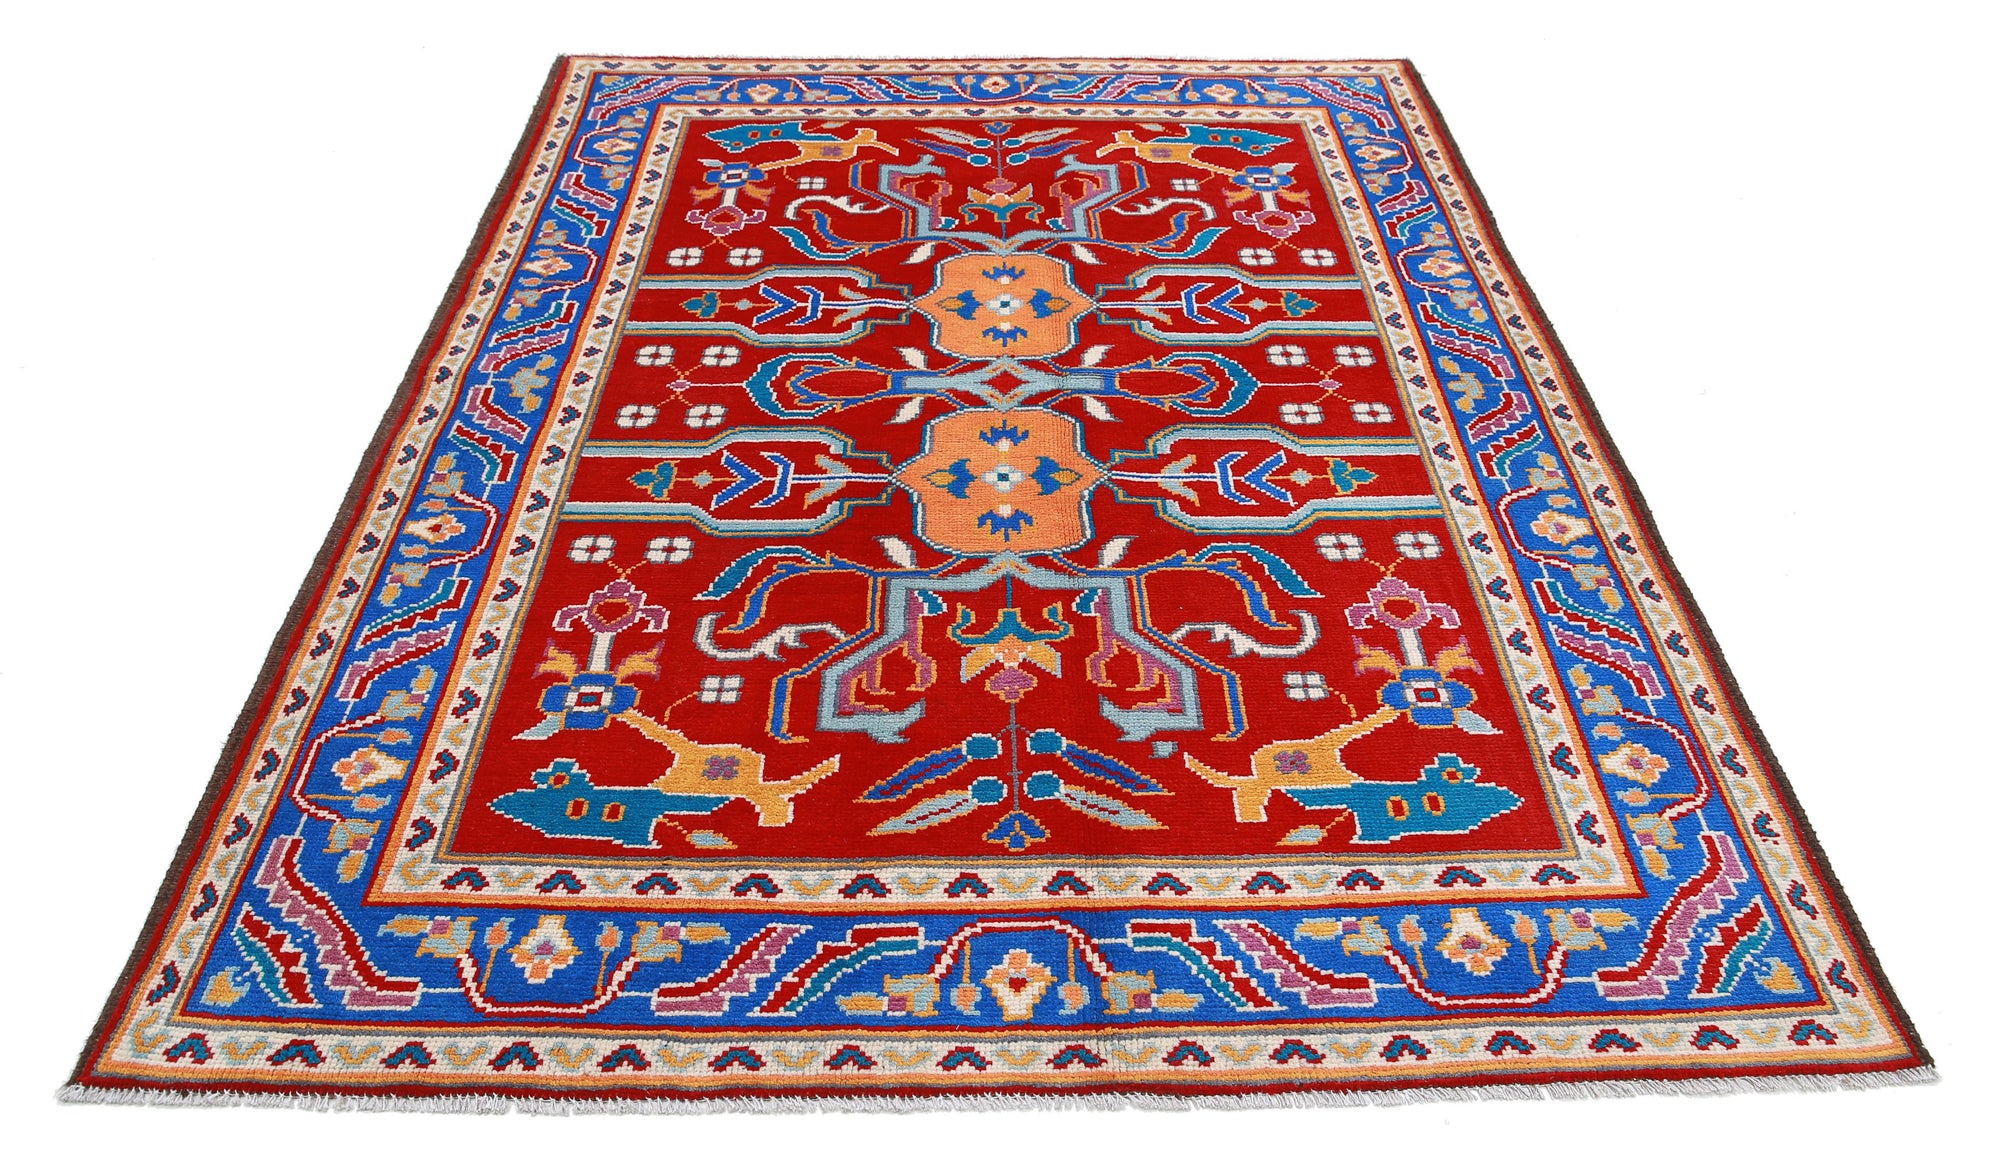 Revival-hand-knotted-qarghani-wool-rug-5014220-3.jpg